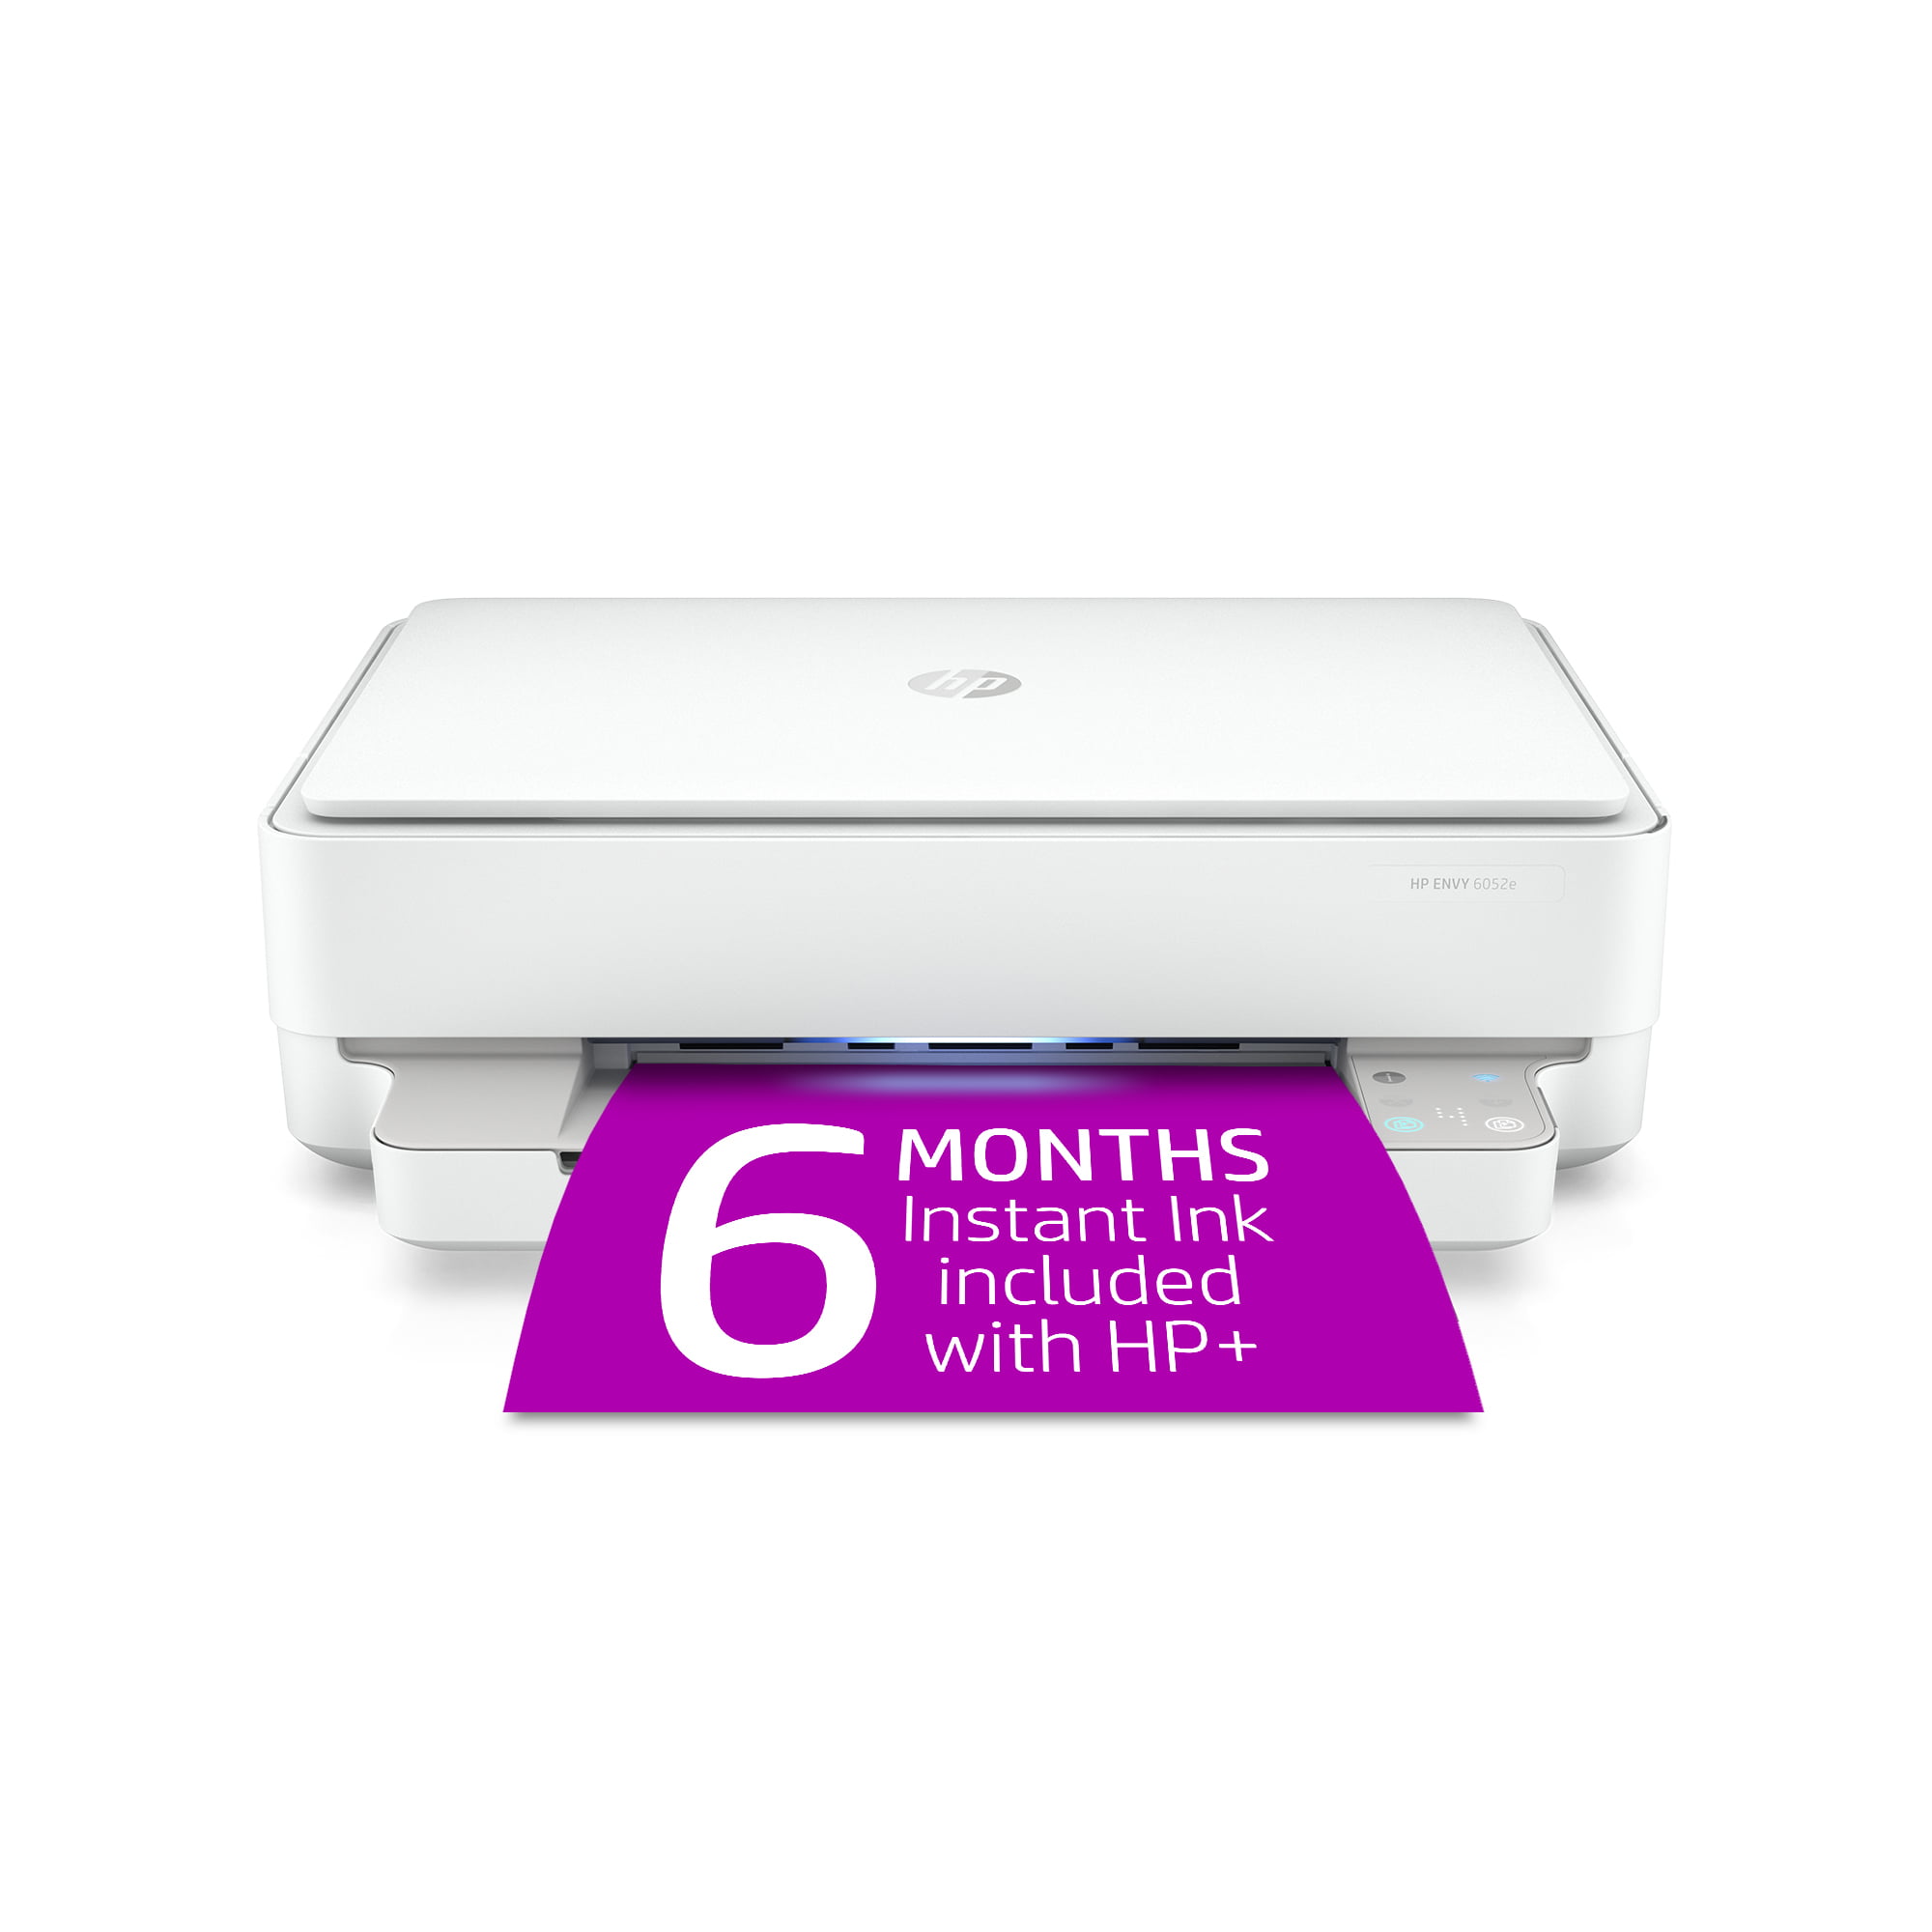 HP ENVY 6452e All-in-One Color Inkjet Printer with Months Instant Ink Included with HP+ - Walmart.com